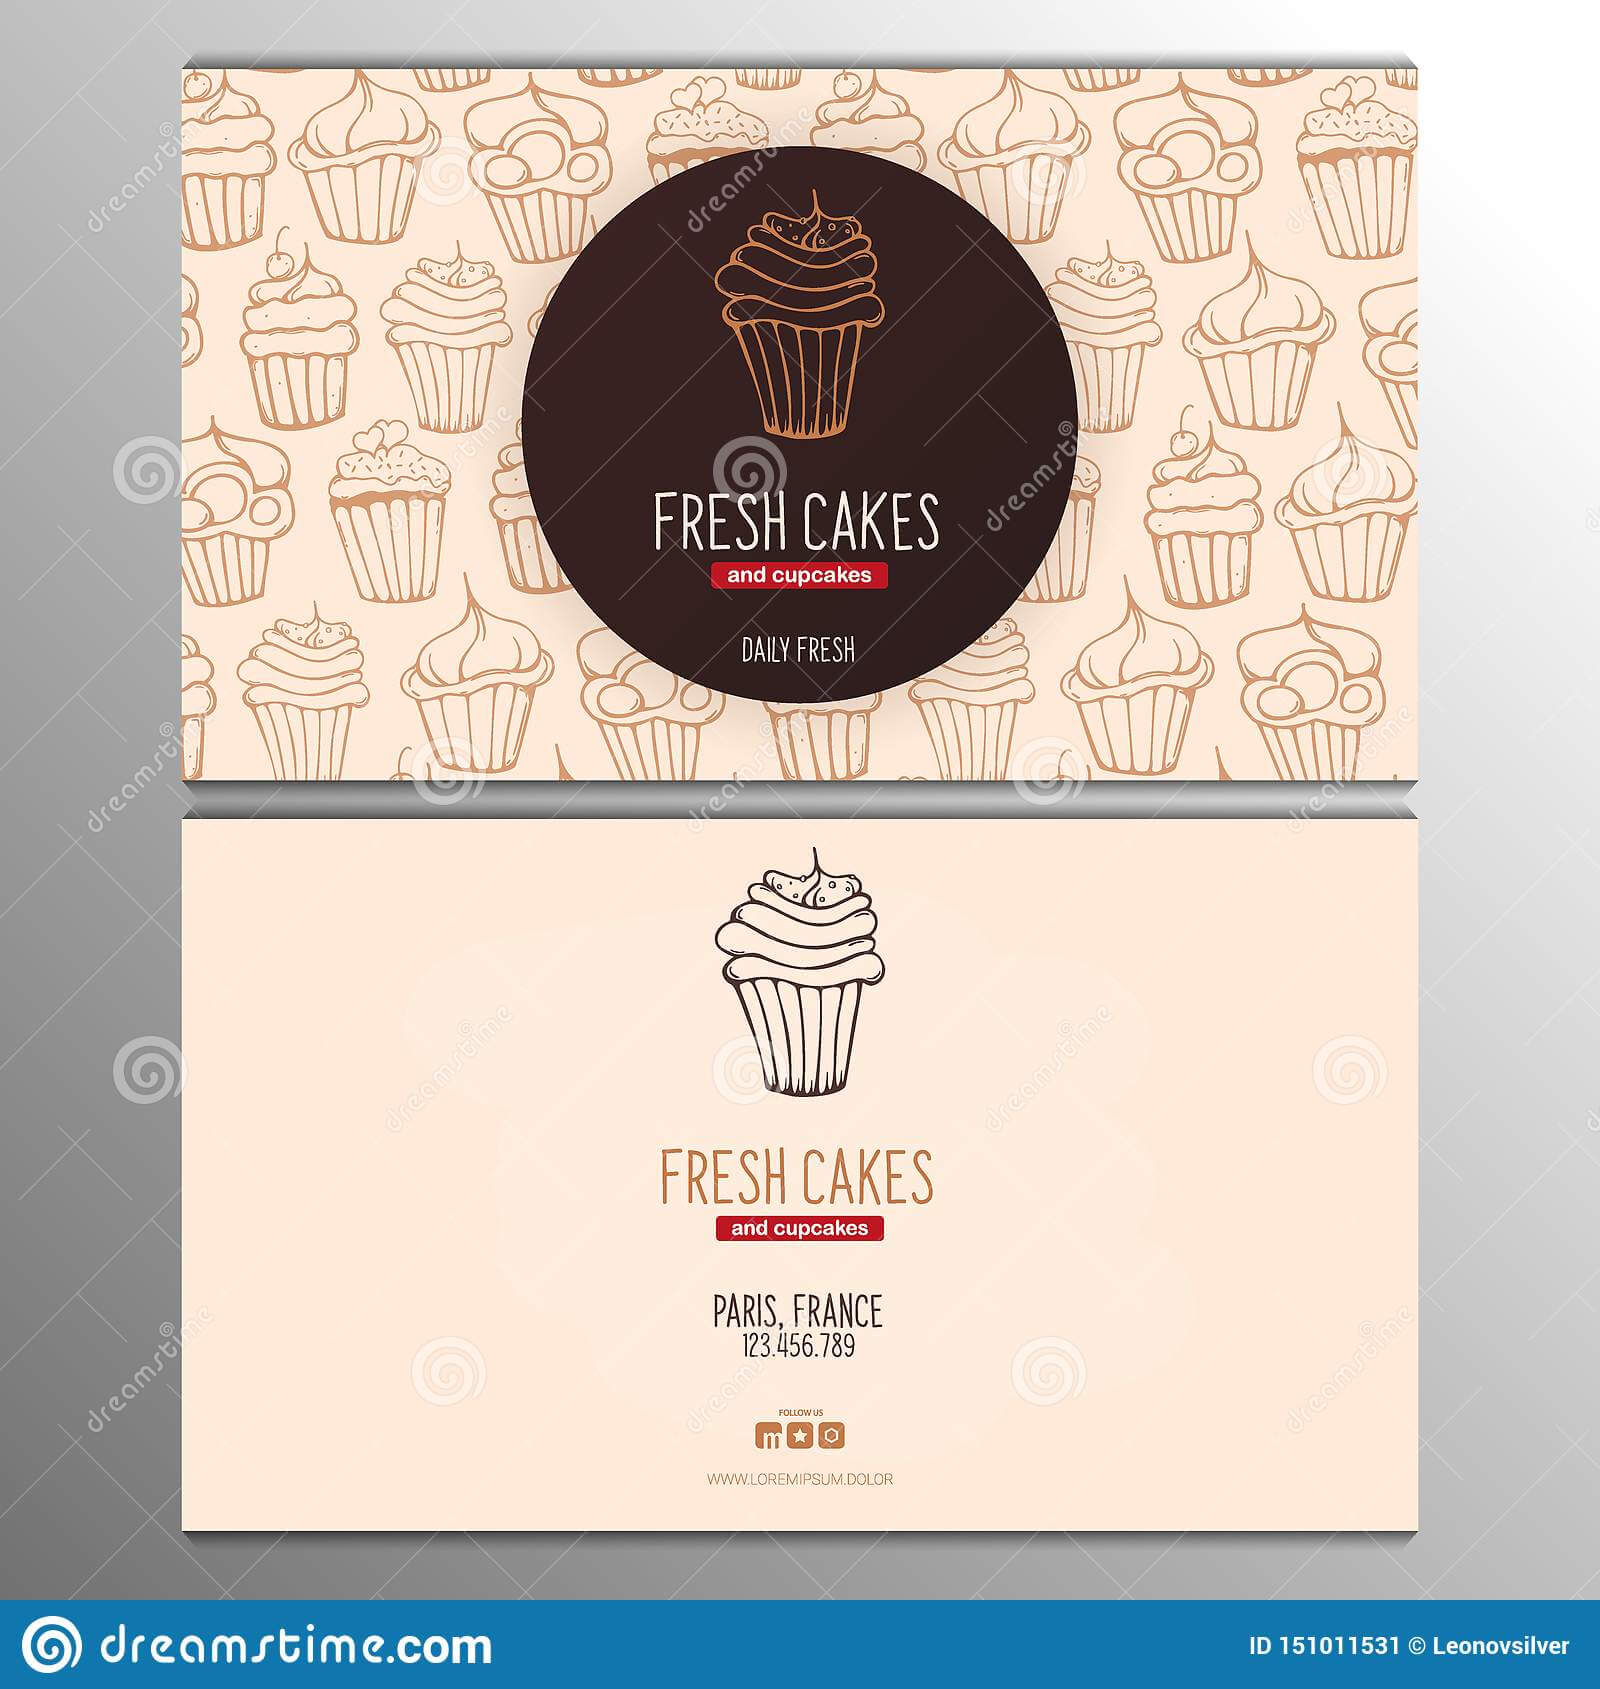 Cupcake Or Cake Business Card Template For Bakery Or Pastry In Cake Business Cards Templates Free